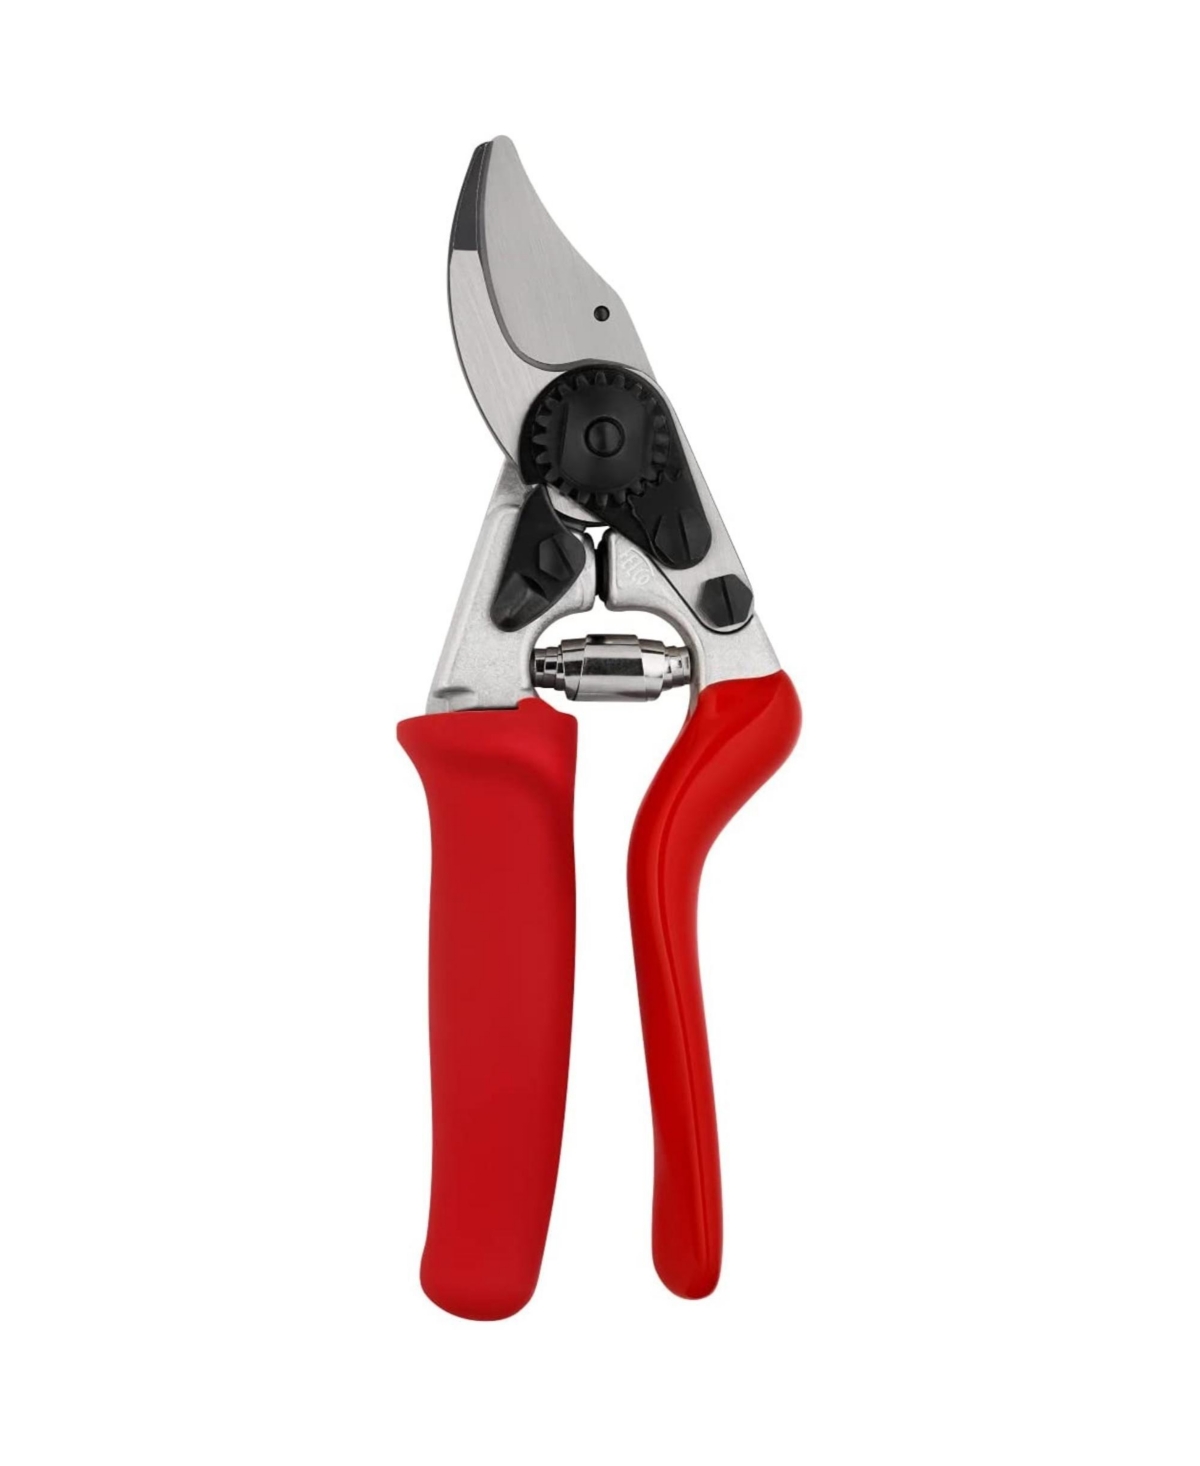 Small Hand Bypass Pruning Shear with Rotating Handle - Multi